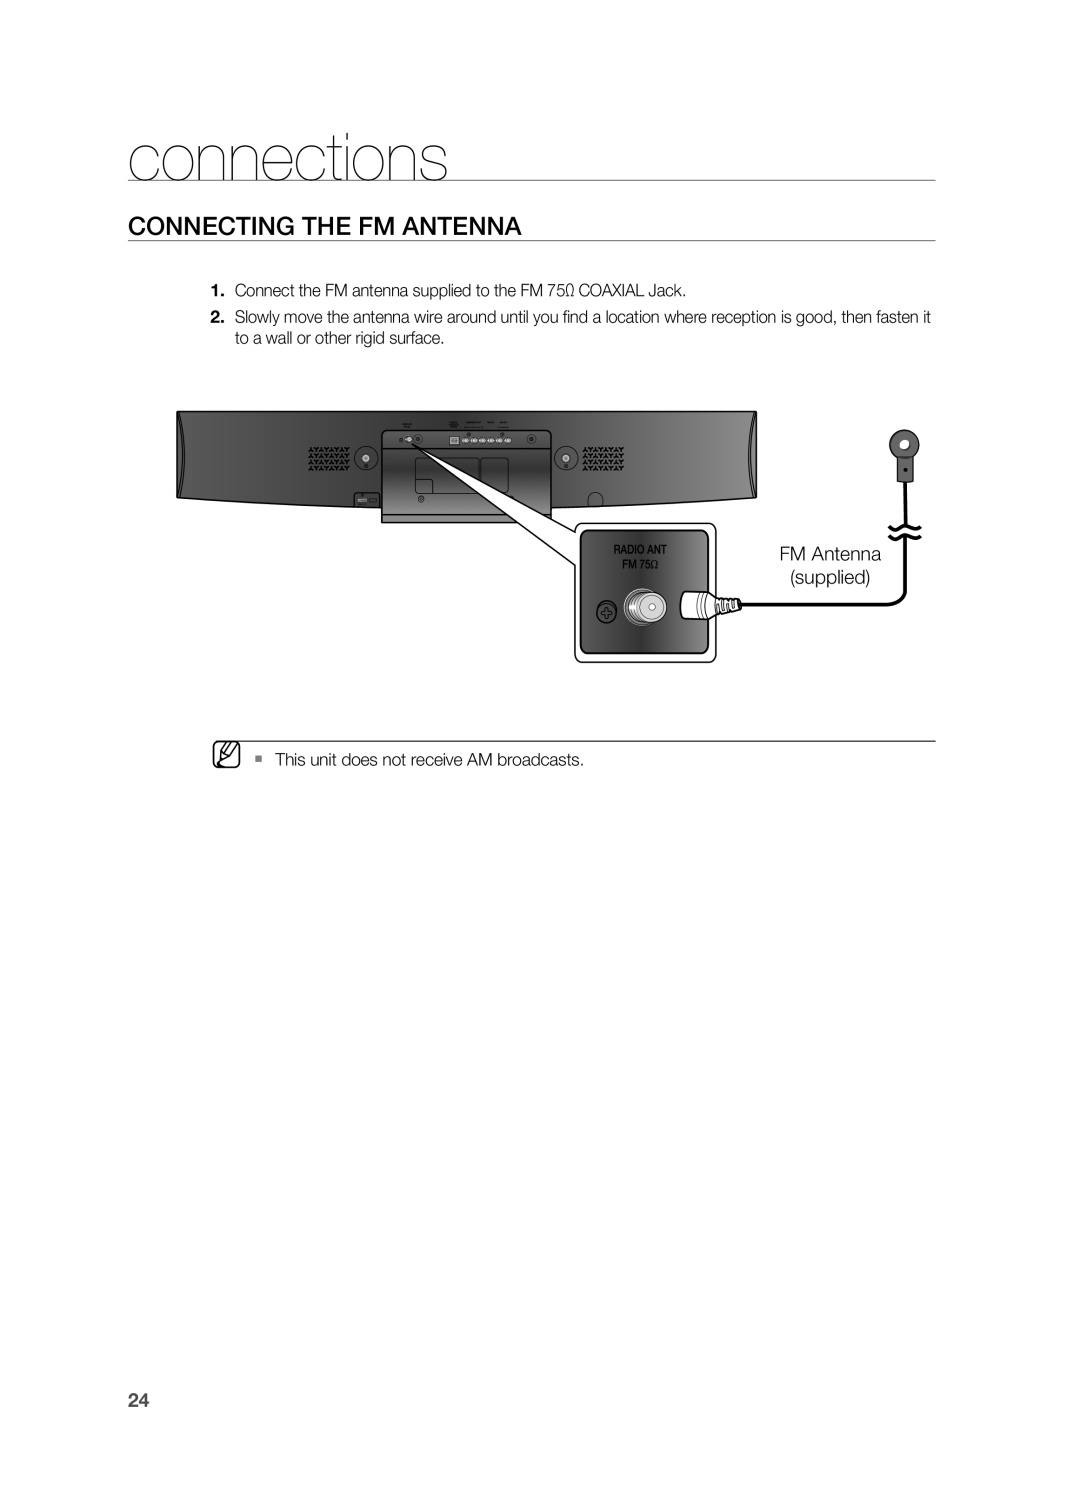 Sony HT-X810 user manual Connecting the FM Antenna, connections, FM Antenna supplied, Hdmi Out 